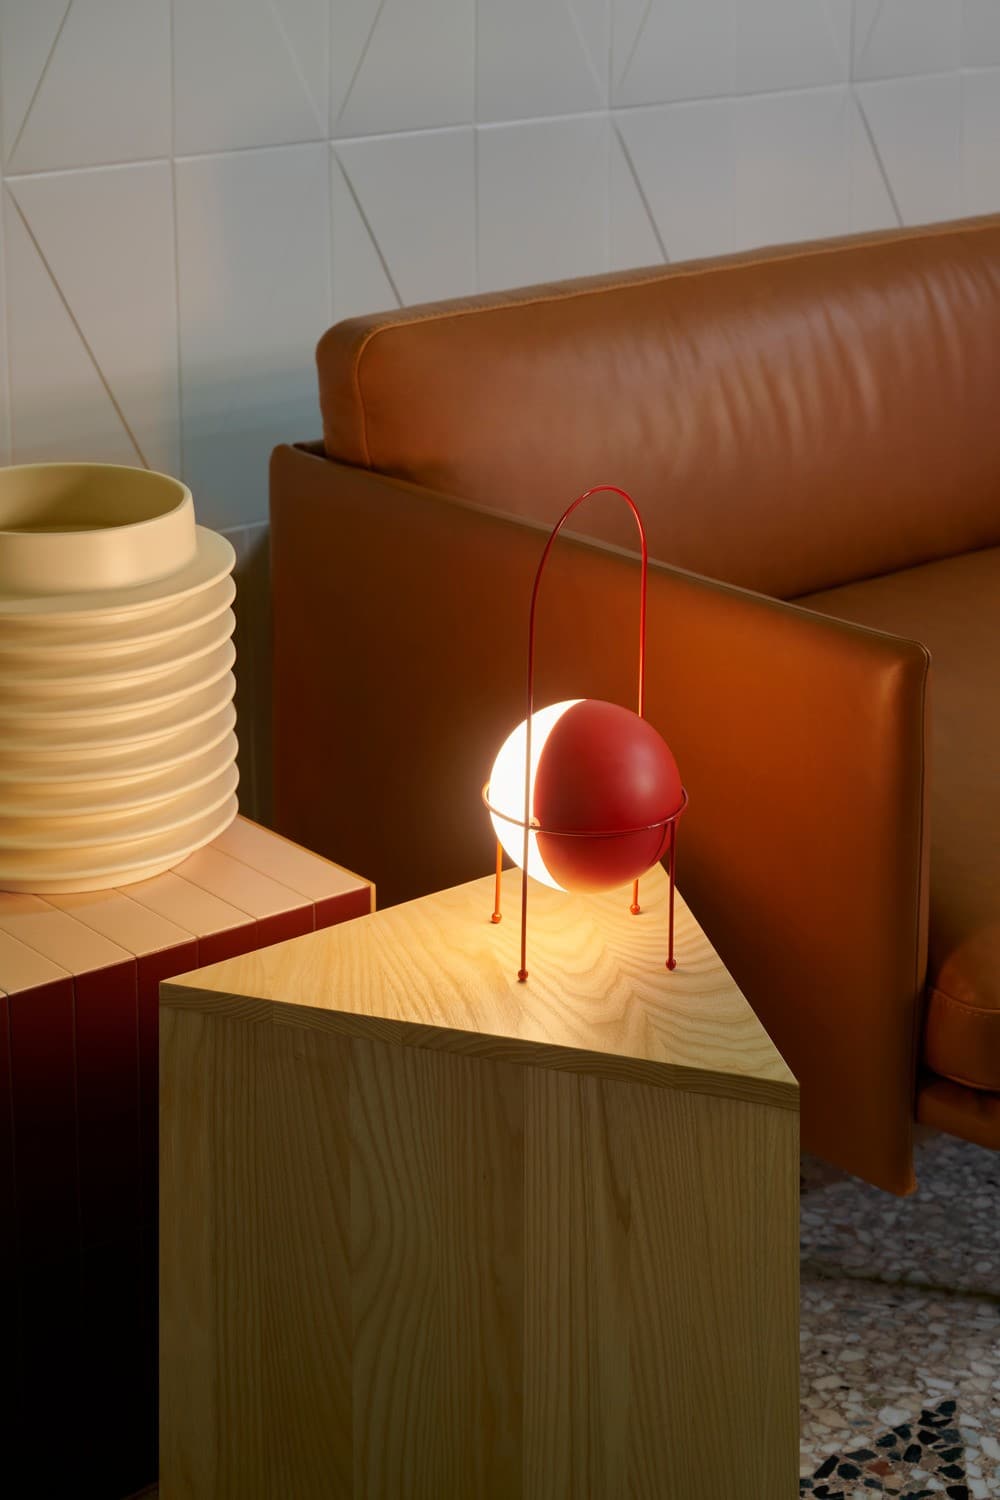 Elisa Ossino's “Wearable” Lamp for Ambientec